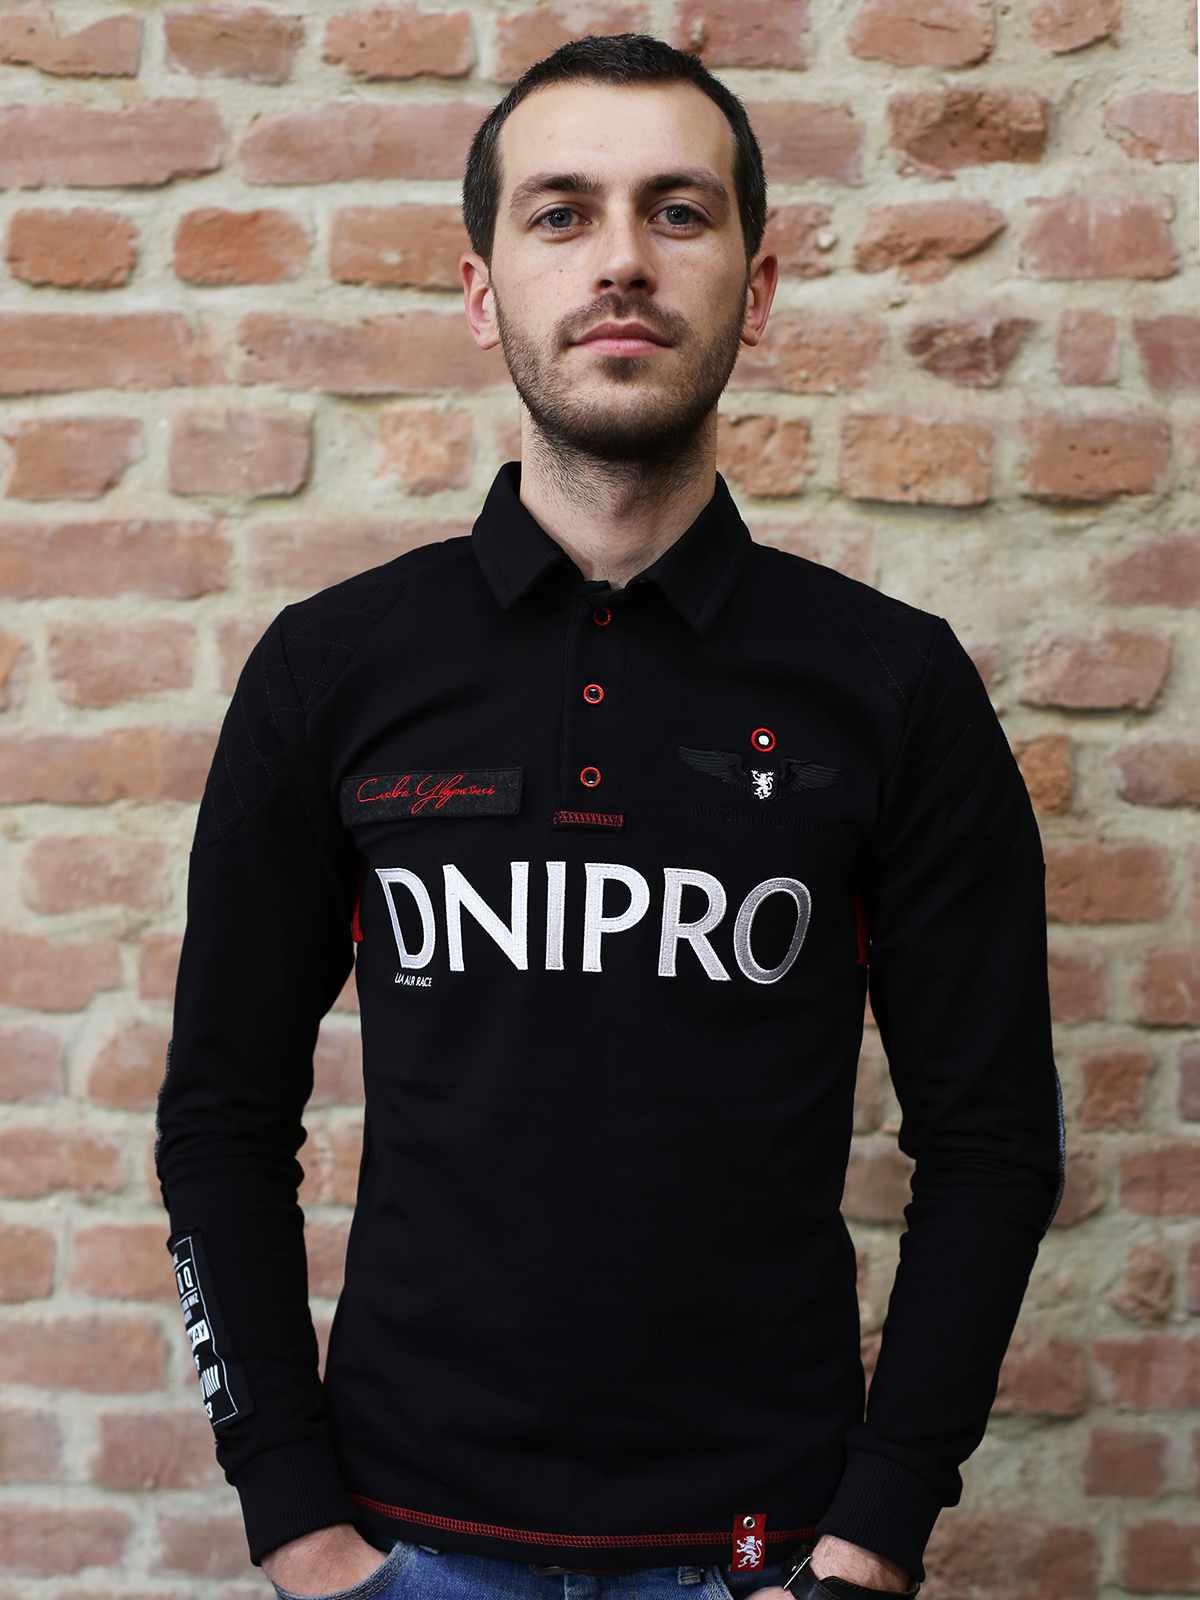 Men's Polo Long Air Race Dnipro. Color black. Material: 75% cotton, 21% polyester, 4% spandex.